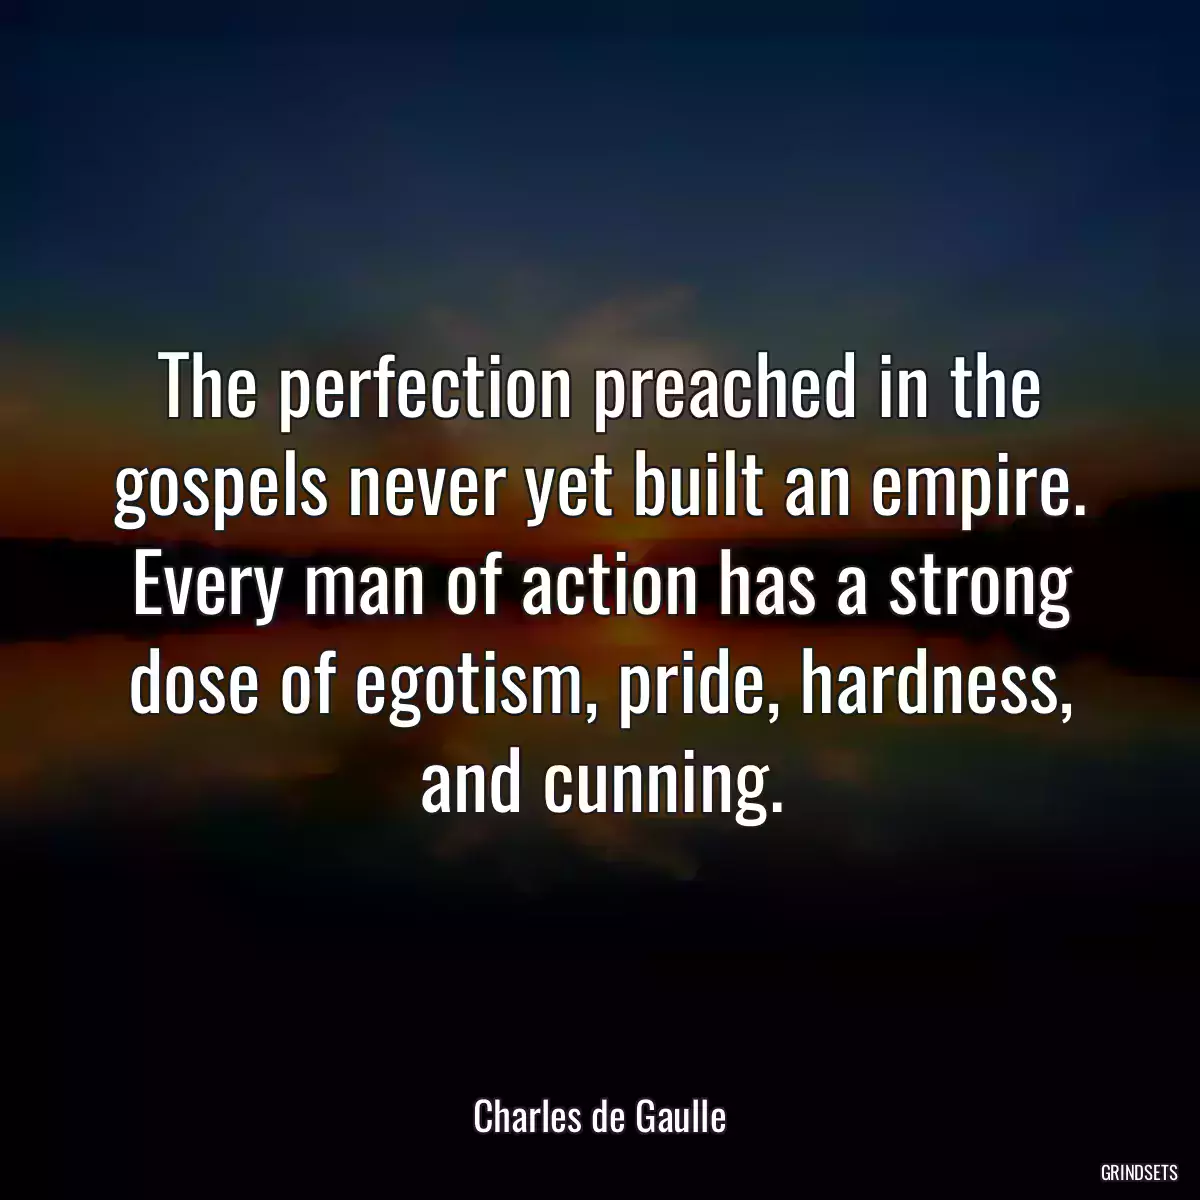 The perfection preached in the gospels never yet built an empire. Every man of action has a strong dose of egotism, pride, hardness, and cunning.